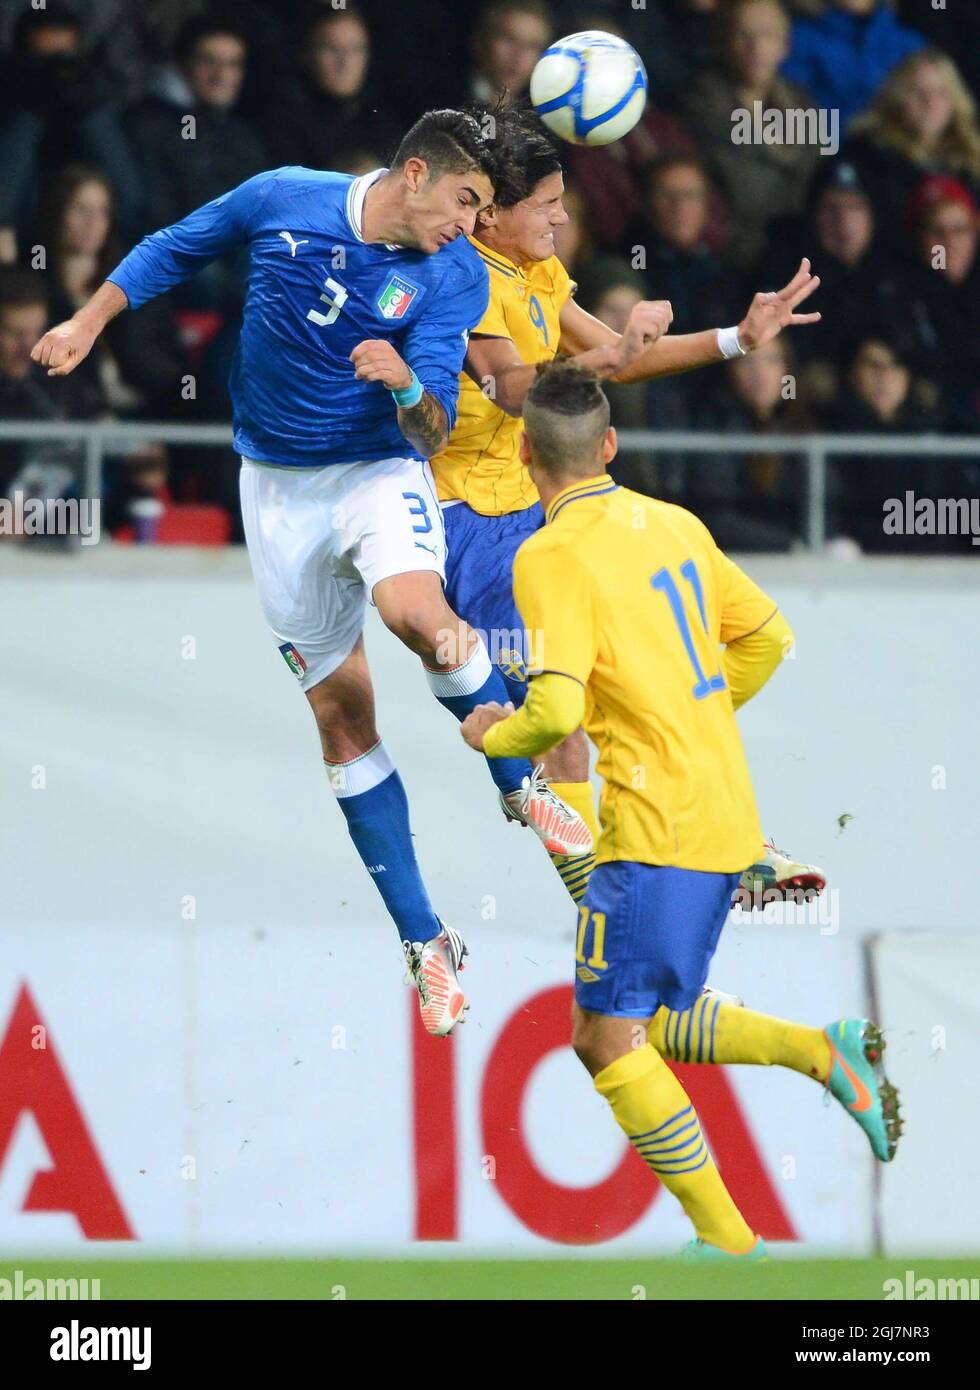 KALMAR 2012-10-16  Italy's Paolo Frascatore, left, goes for a header with Sweden's Miiko Albornoz, center, as Sweden's Mervan Celik looks on during the UEFA European Under-21 Championship qualification match between Sweden and Italy at the Guldfageln arena in Kalmar, Sweden, on Oct. 16, 2012. Photo: Patric Soderstrom / SCANPIX / code 10760   Stock Photo